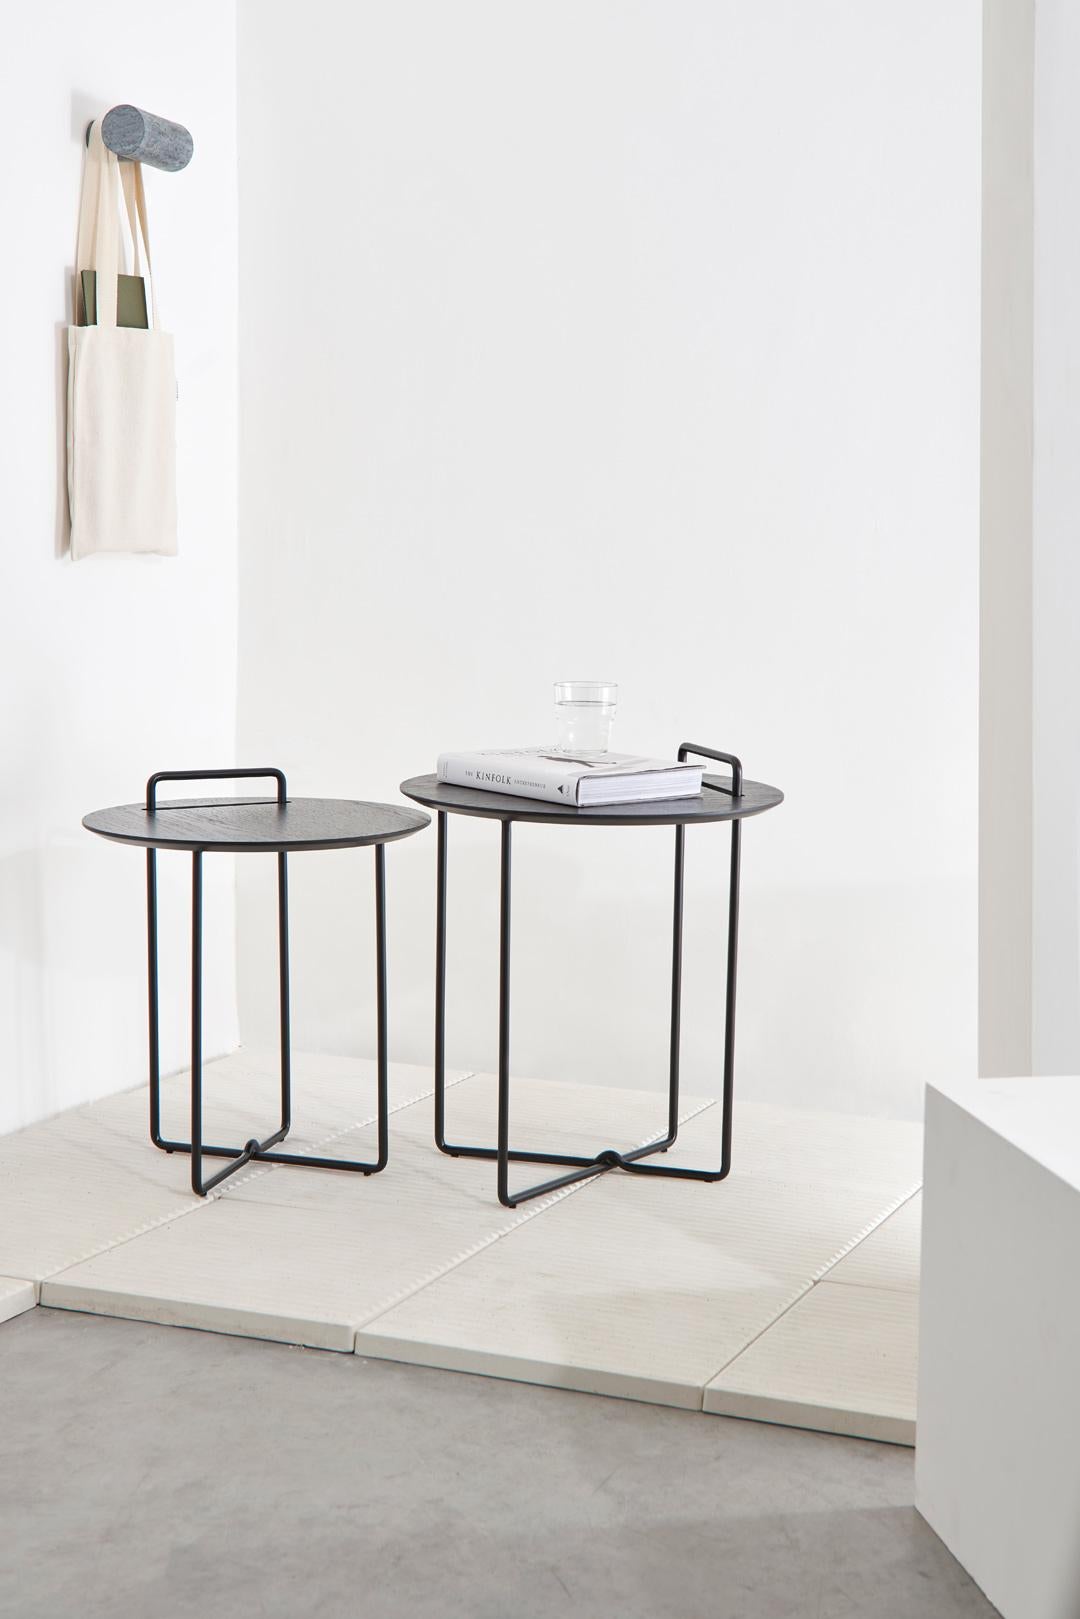 SENSE DUE COLLECTION

To be multiple in one. To multiply without complicating.
These are the Sense Due Collection motivating ideas, with pieces with potential to become classics in design.
In this collection, Estúdio Iludi seeks, with its defining